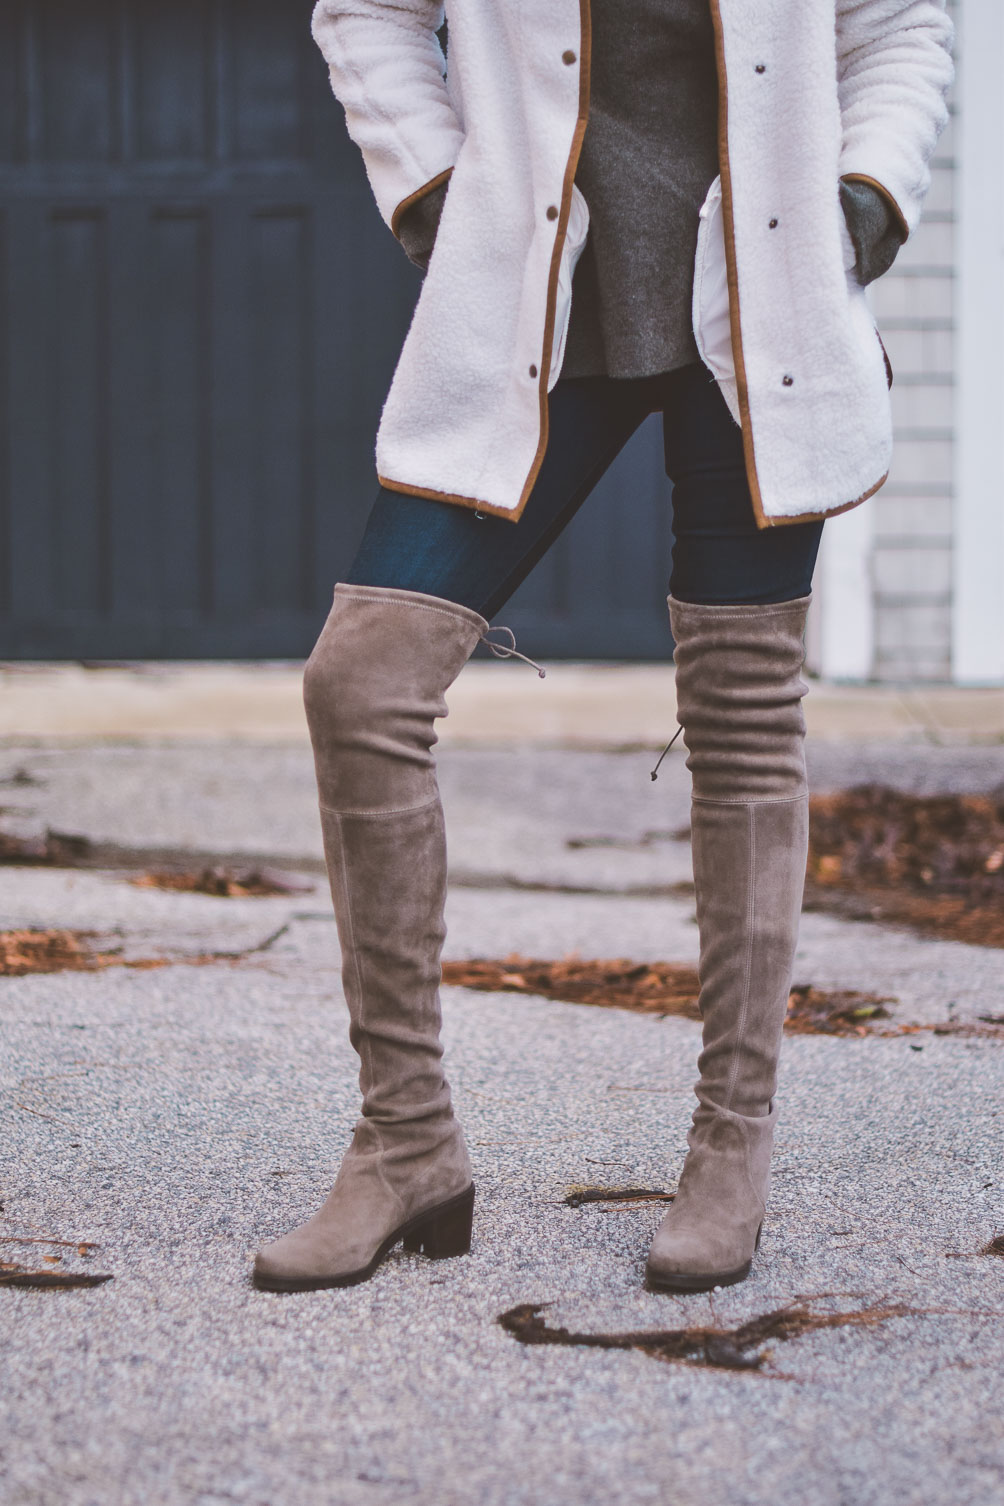 wearing a faux white sherpa jacket for styling neutrals with this cashmere sweater and over the knee Stuart Weitzman boots